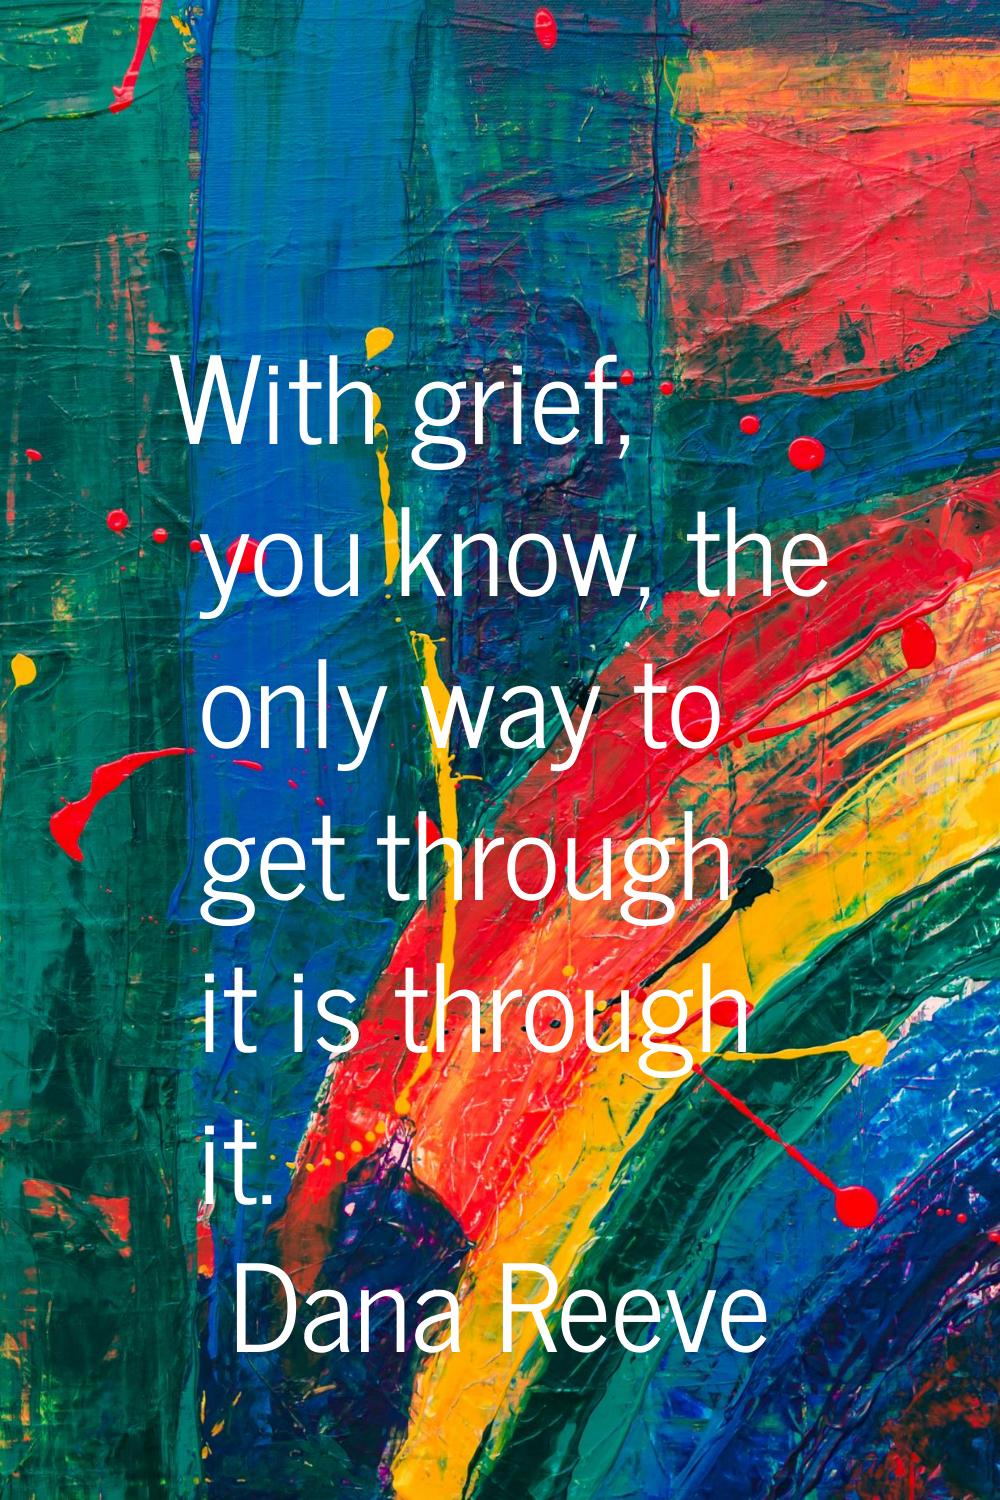 With grief, you know, the only way to get through it is through it.